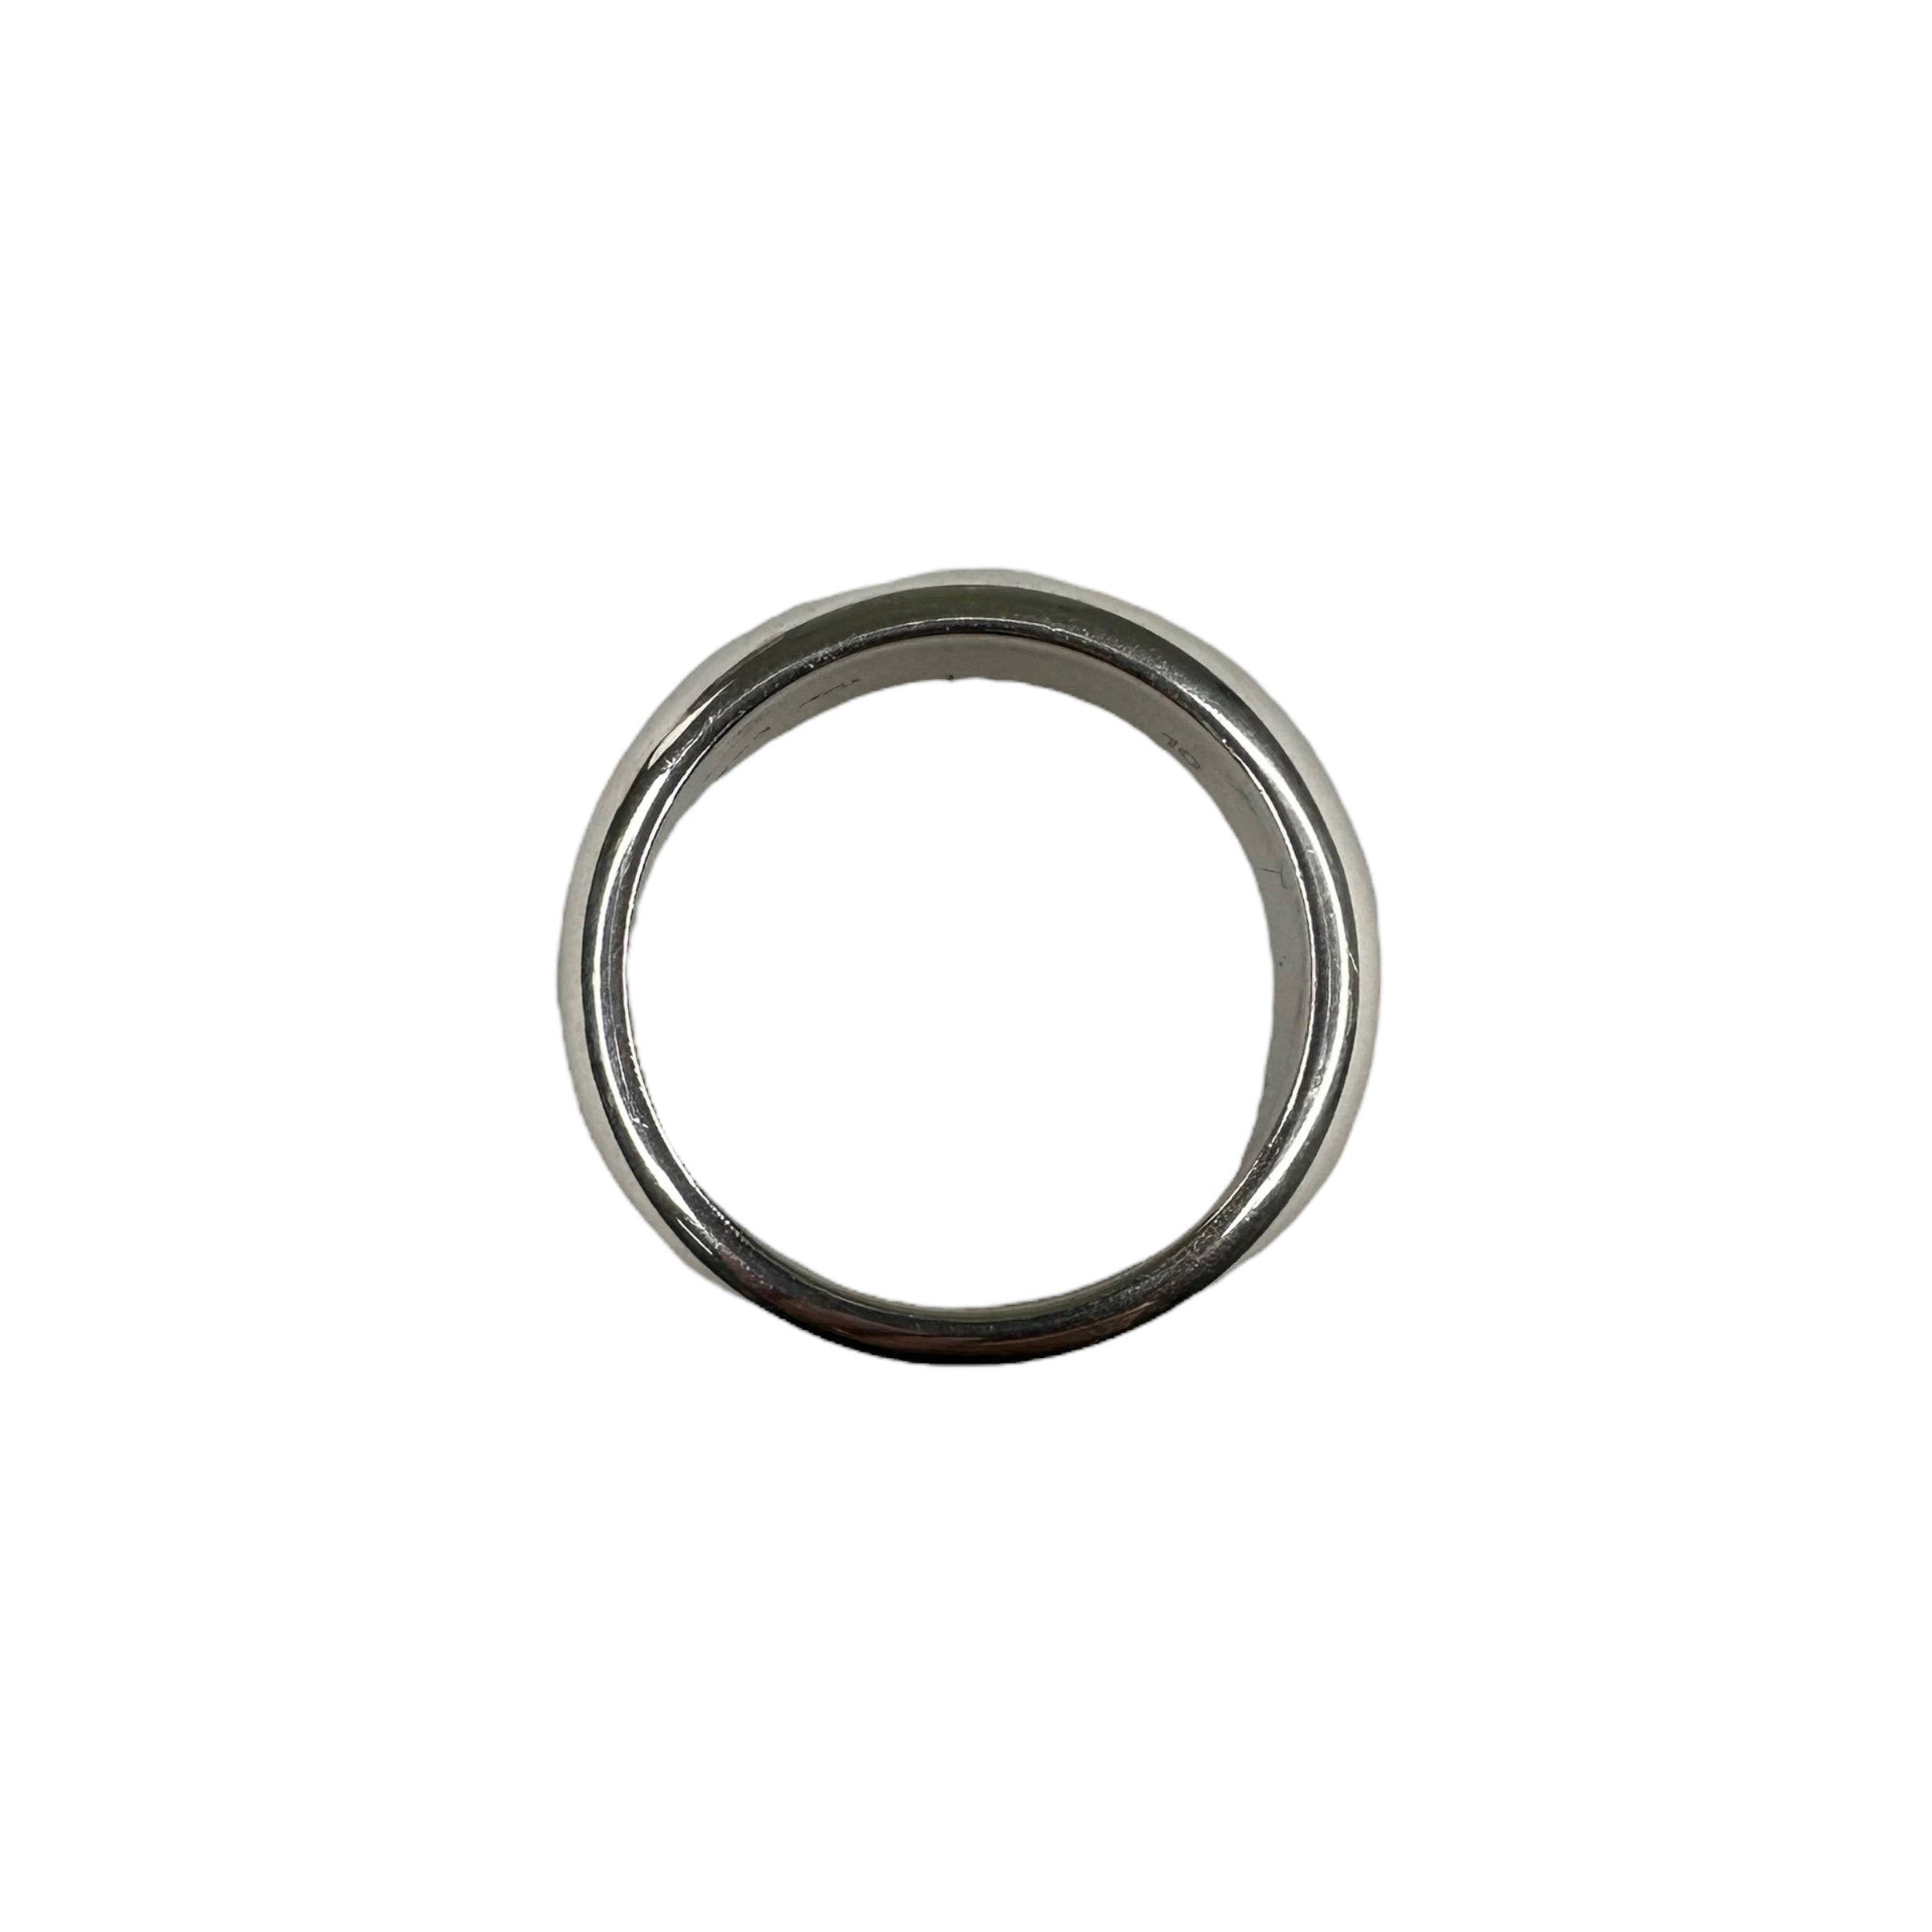 GUCCI ENGRAVED SPELLOUT BAND RING